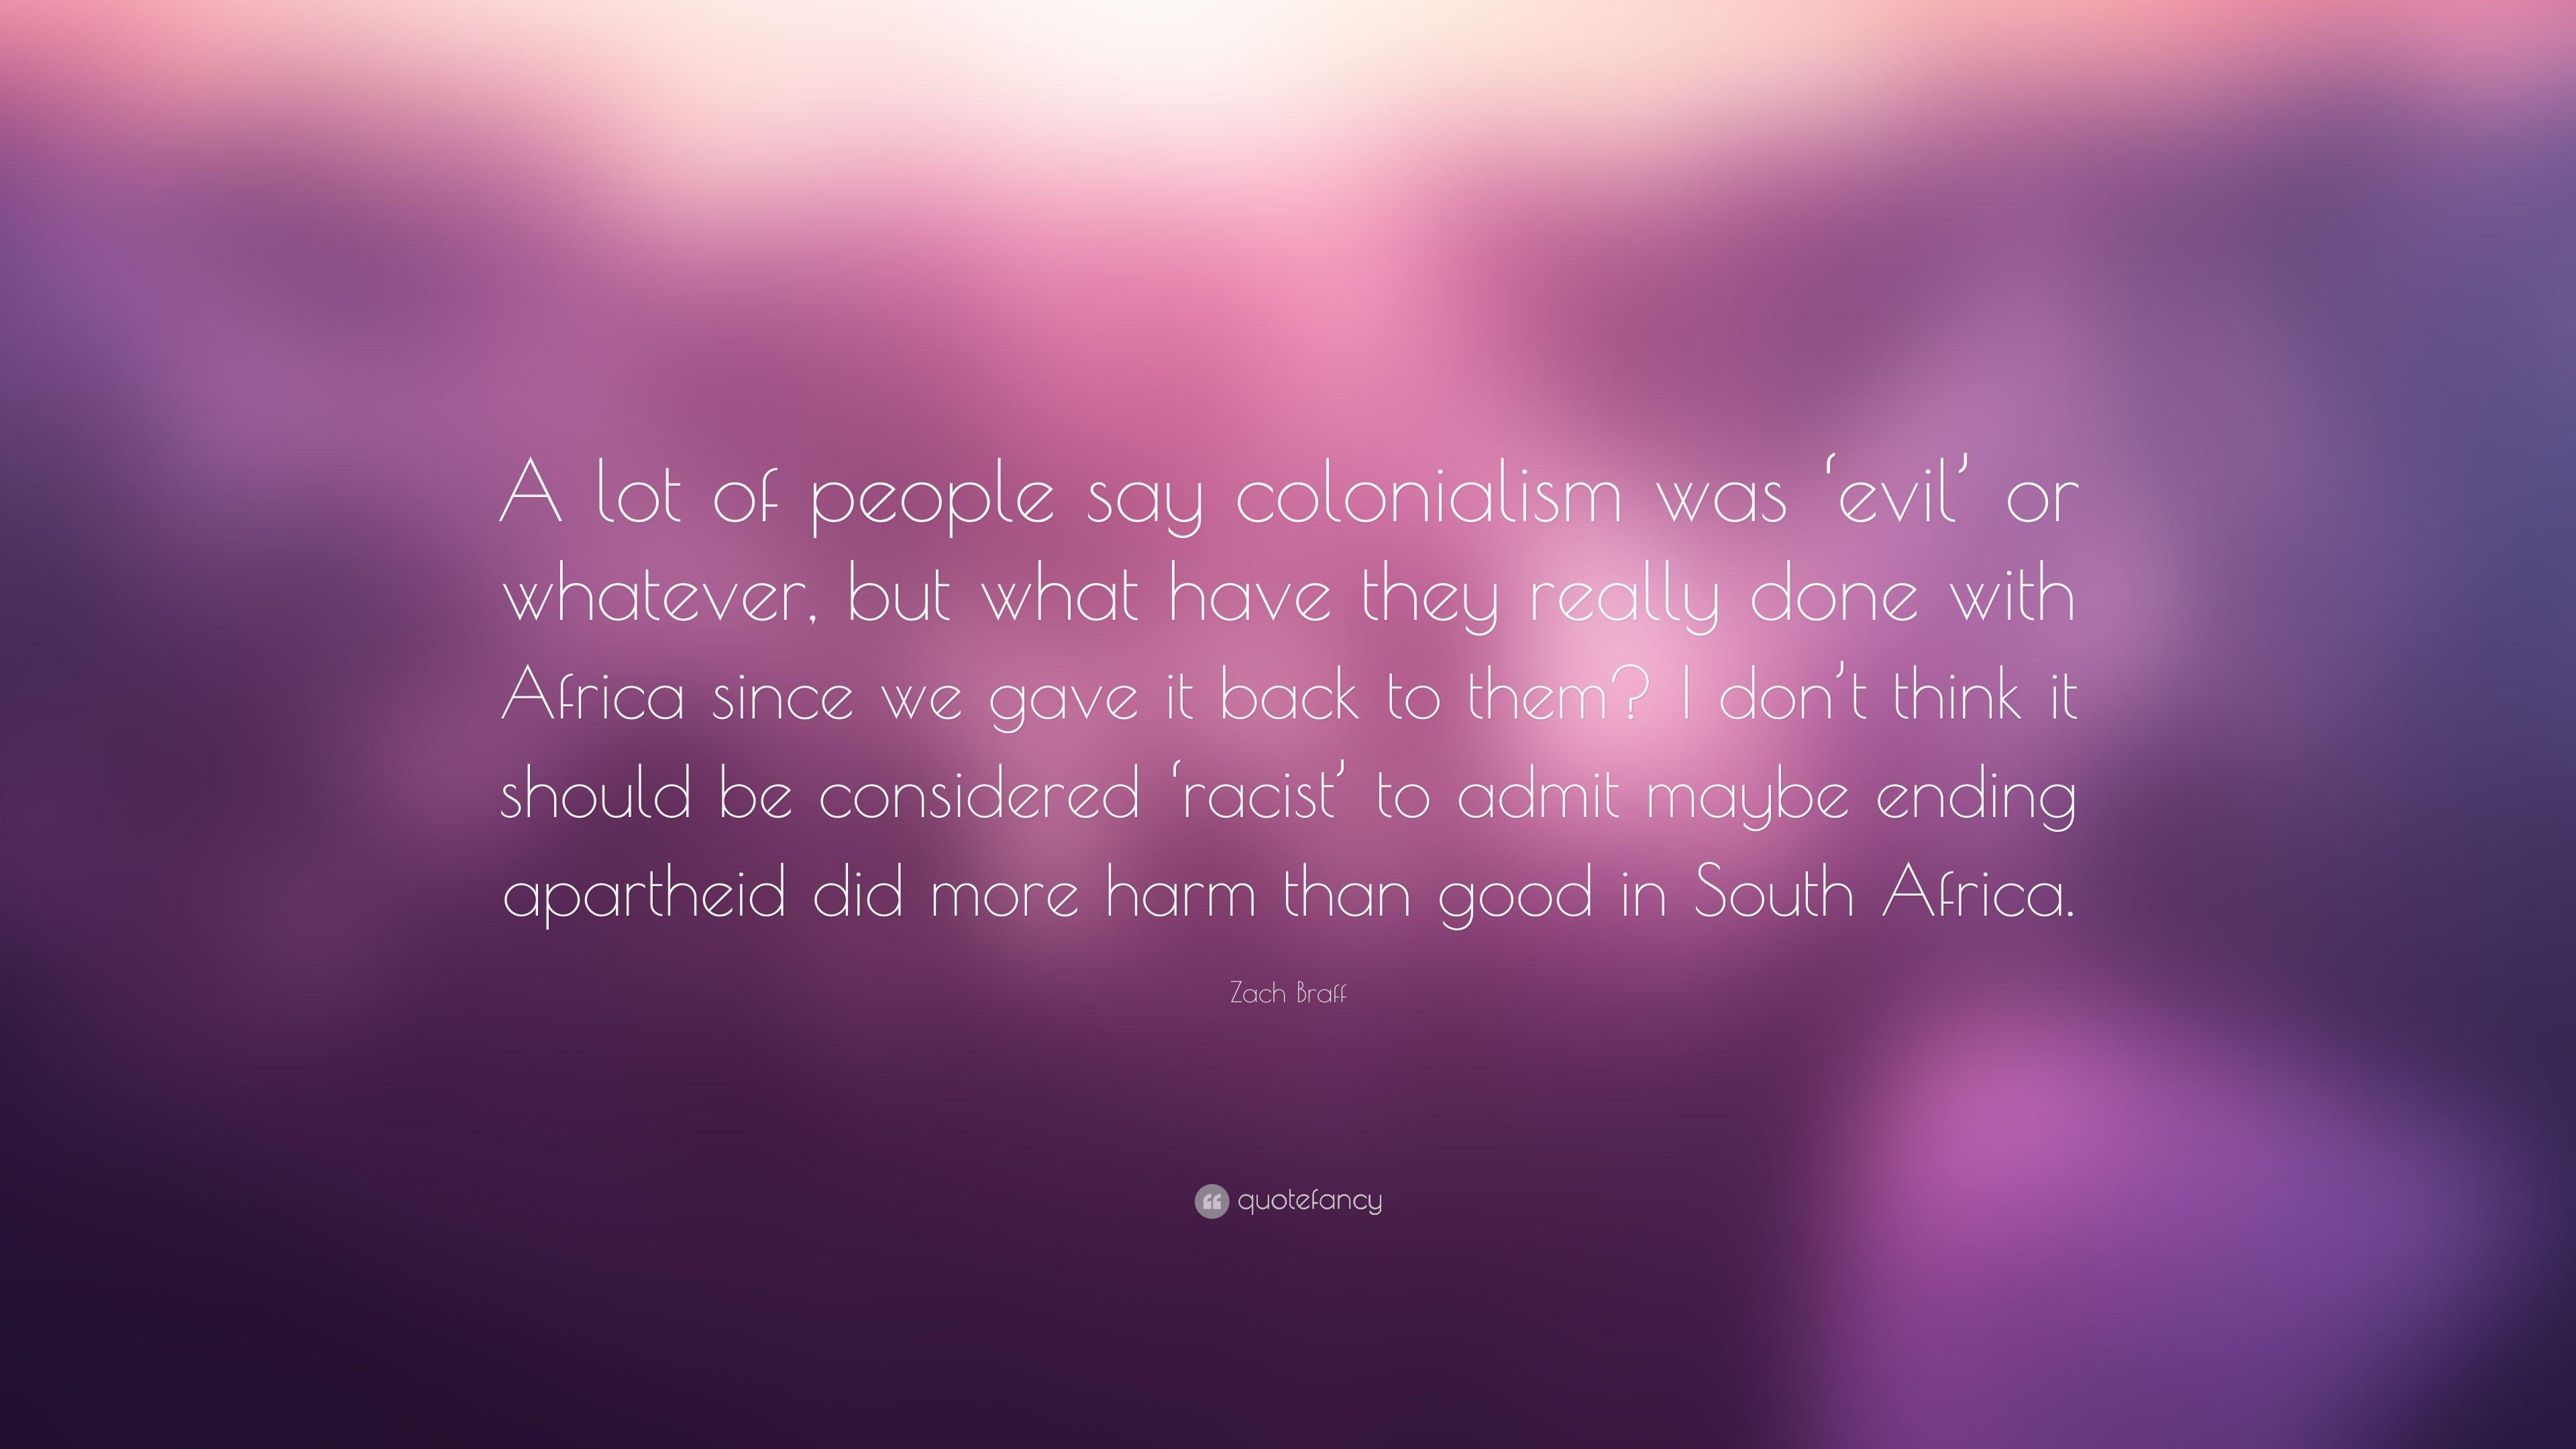 Zach Braff Quote: “A lot of people say colonialism was 'evil' or